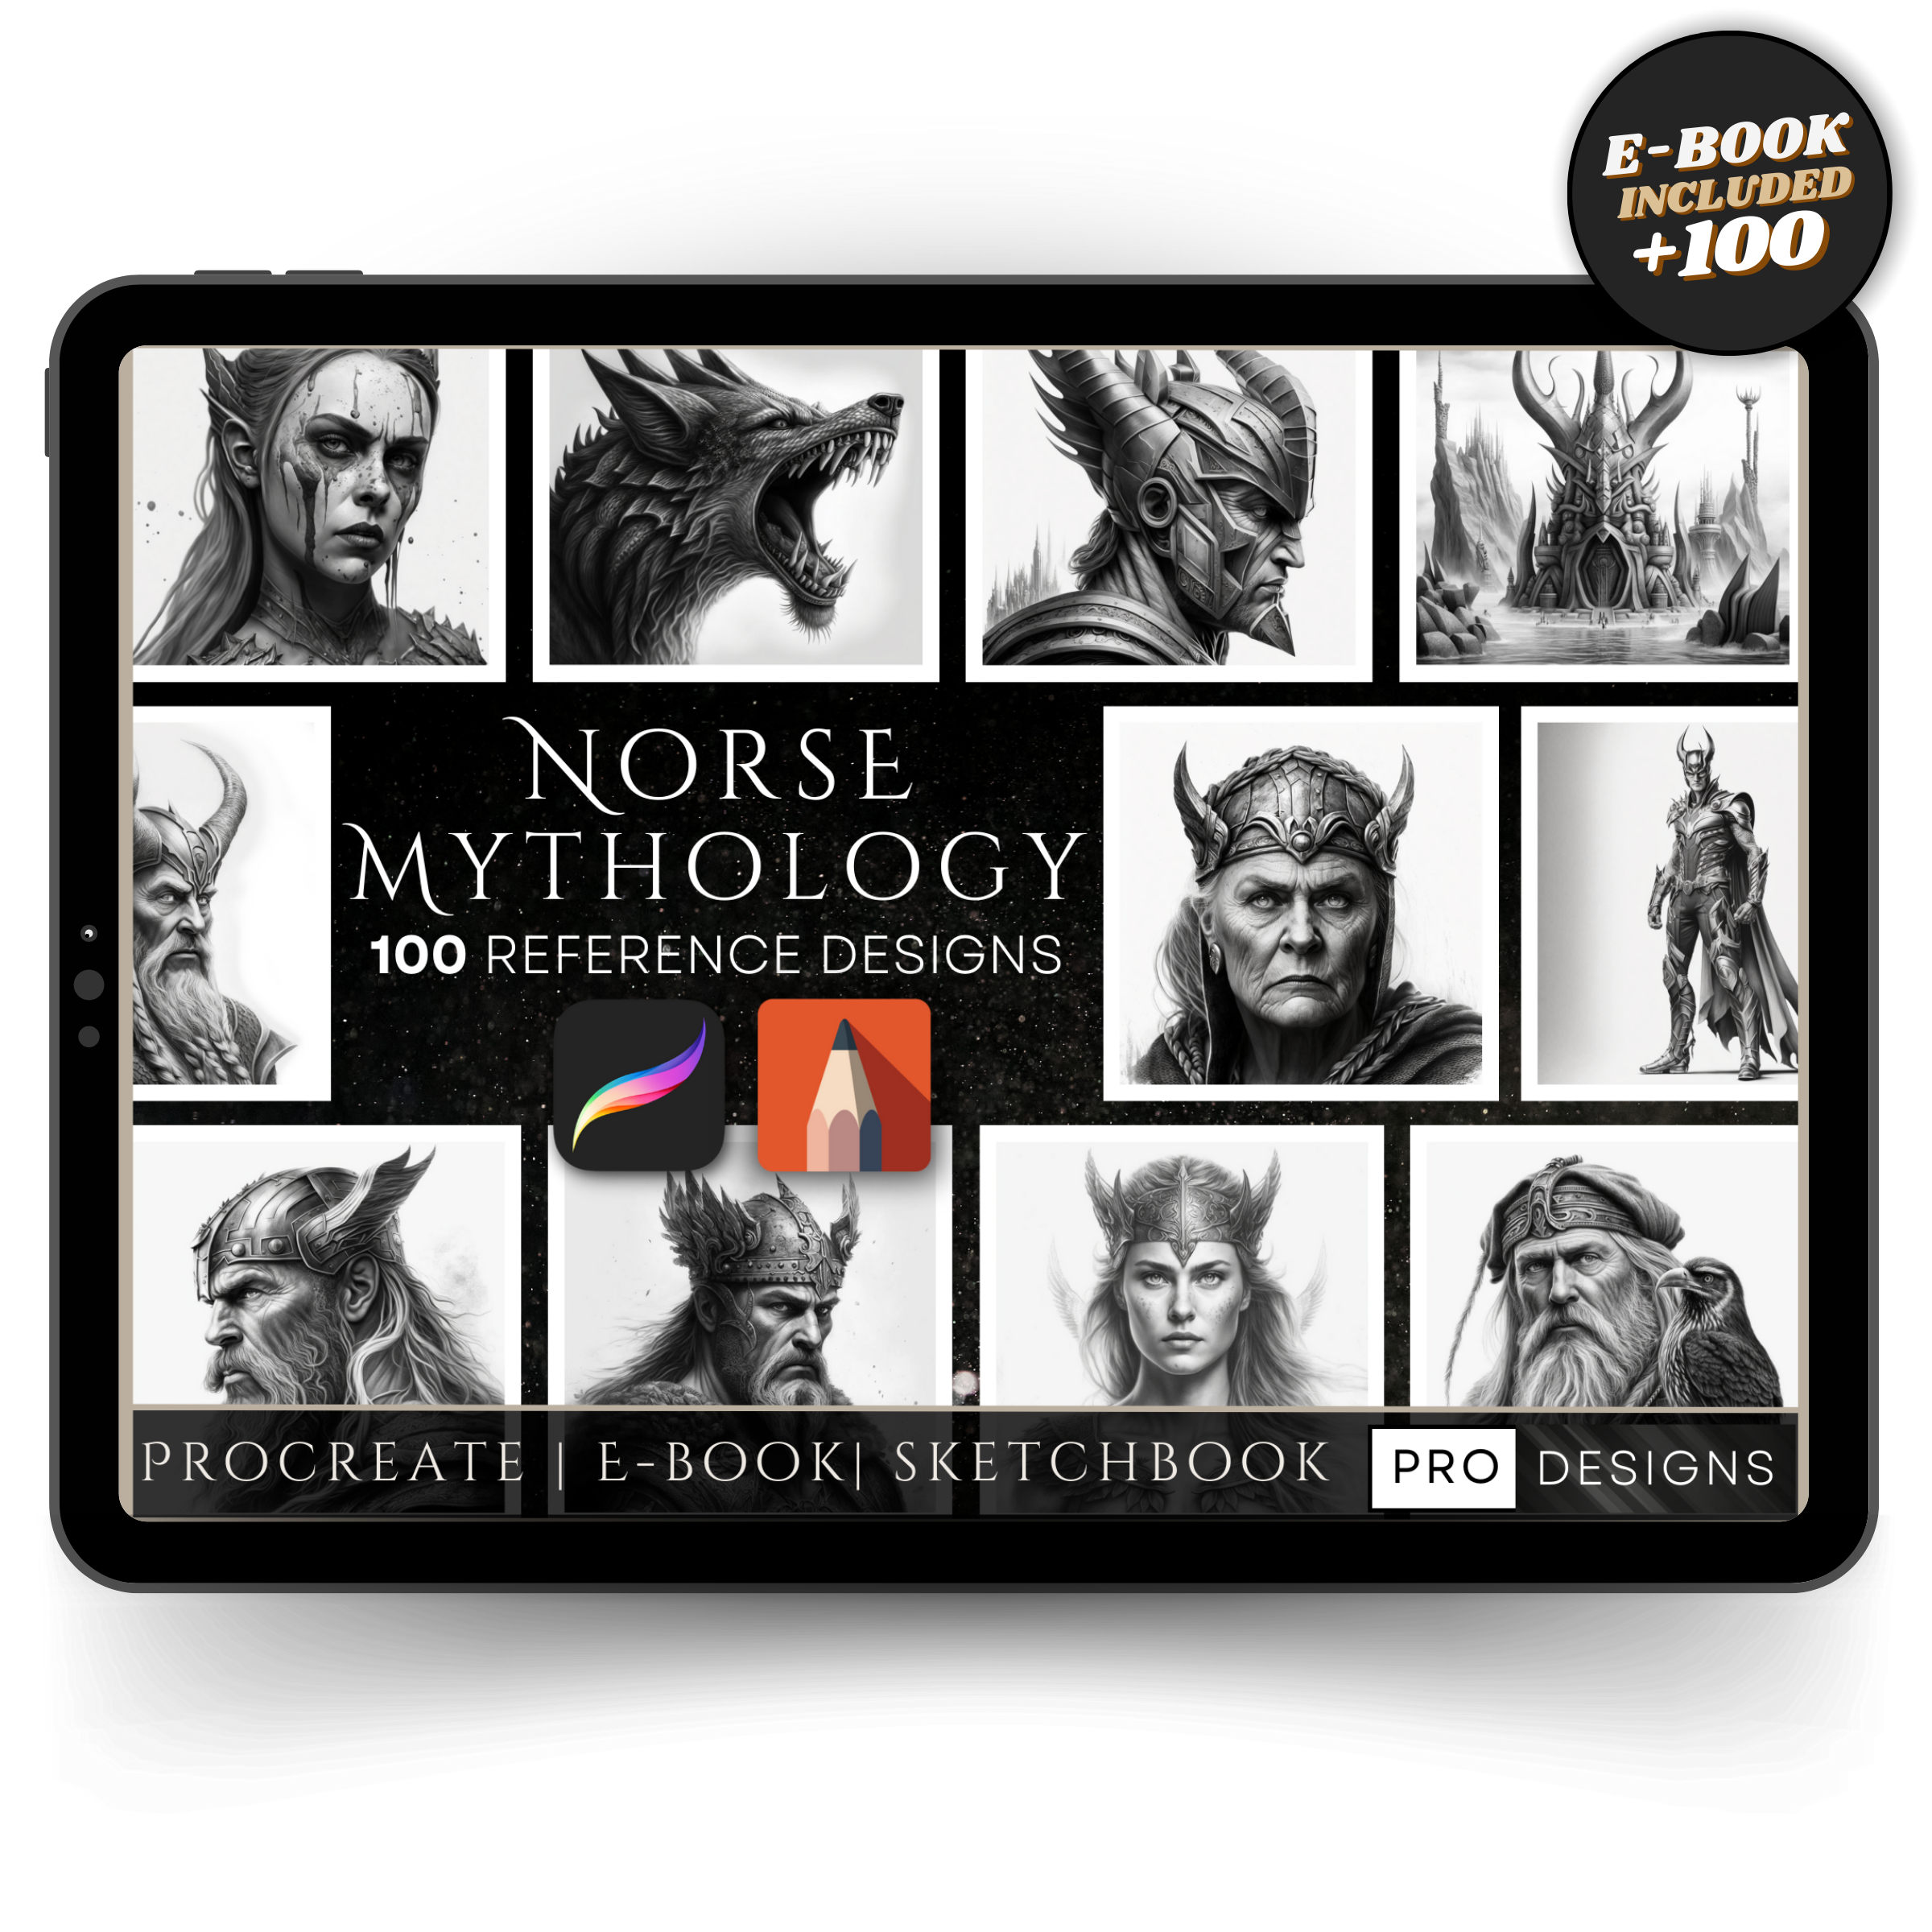 "Echoes of Valhalla" - The Norse Mythology Collection